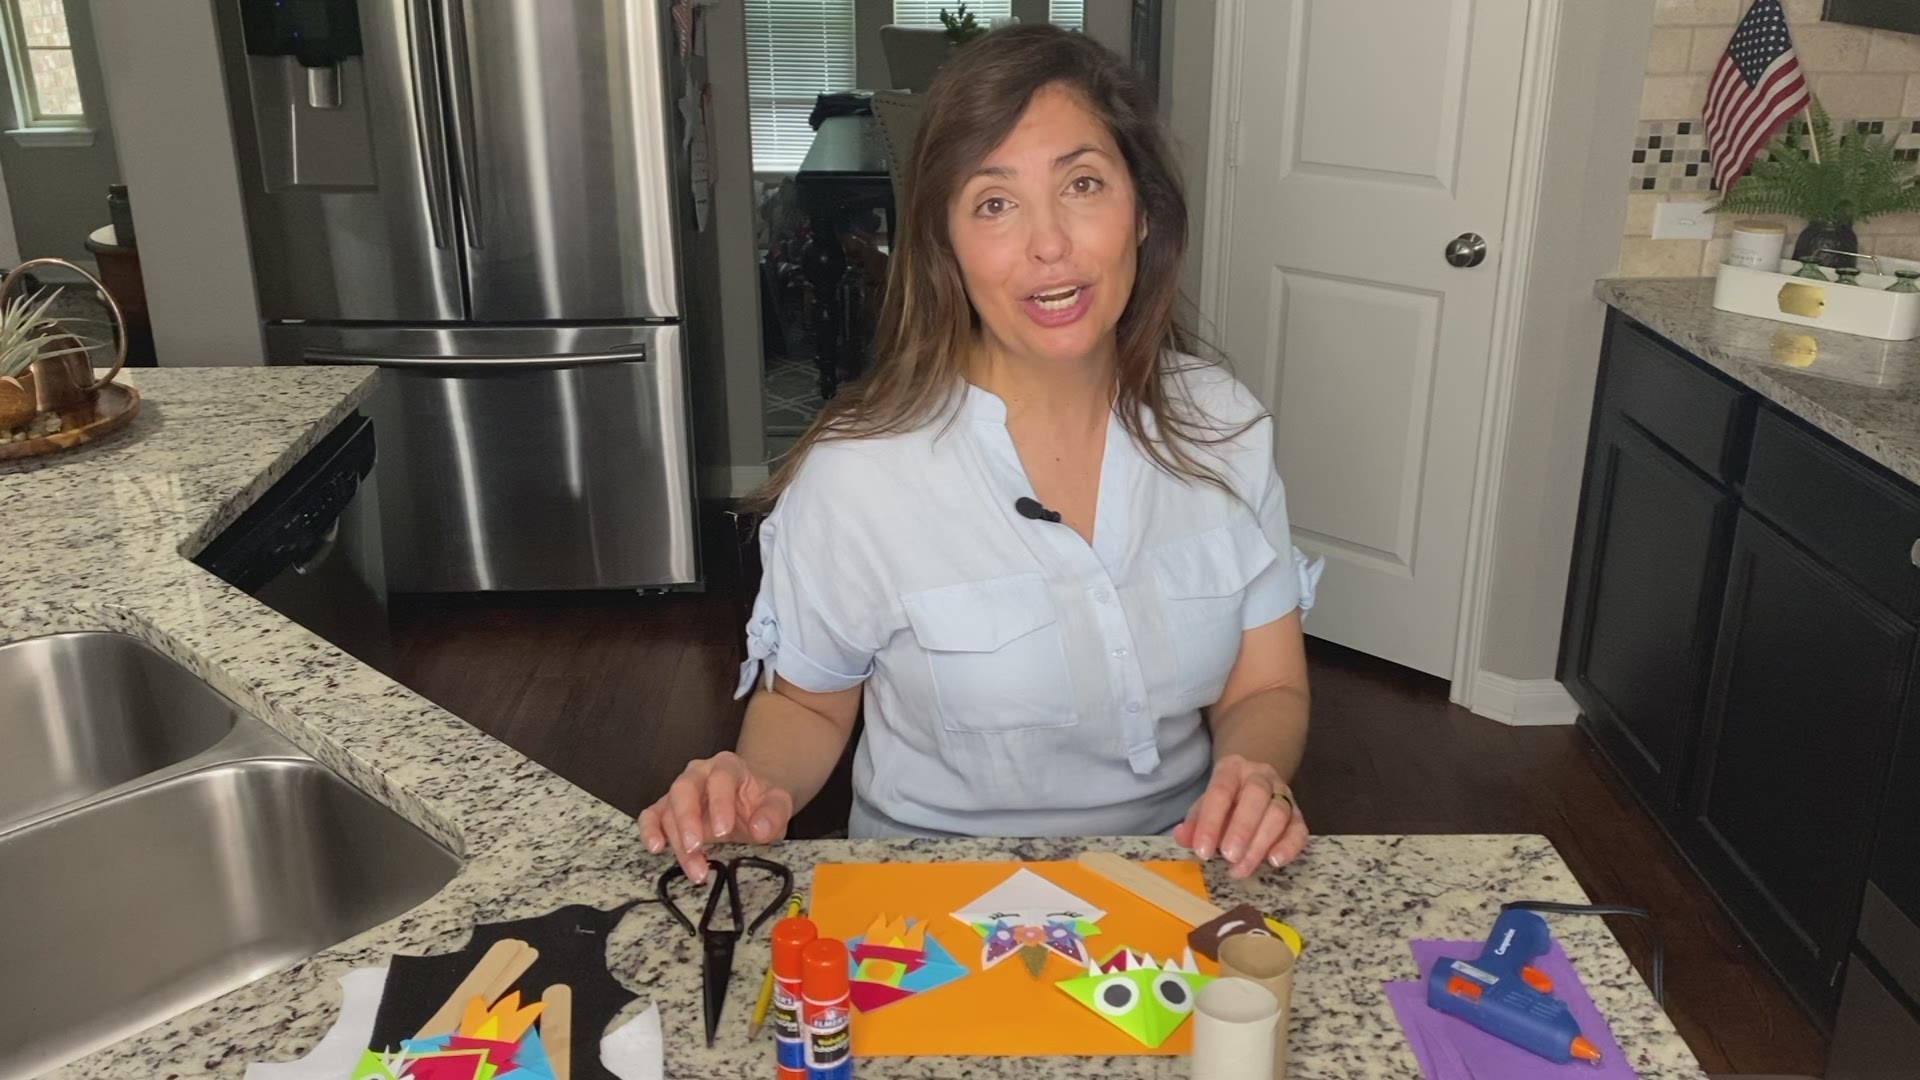 With kids stuck at home due to the coronavirus, the 2019 Fort Hood Military Spouse of the year showed us three, quick crafts to keep them entertained.